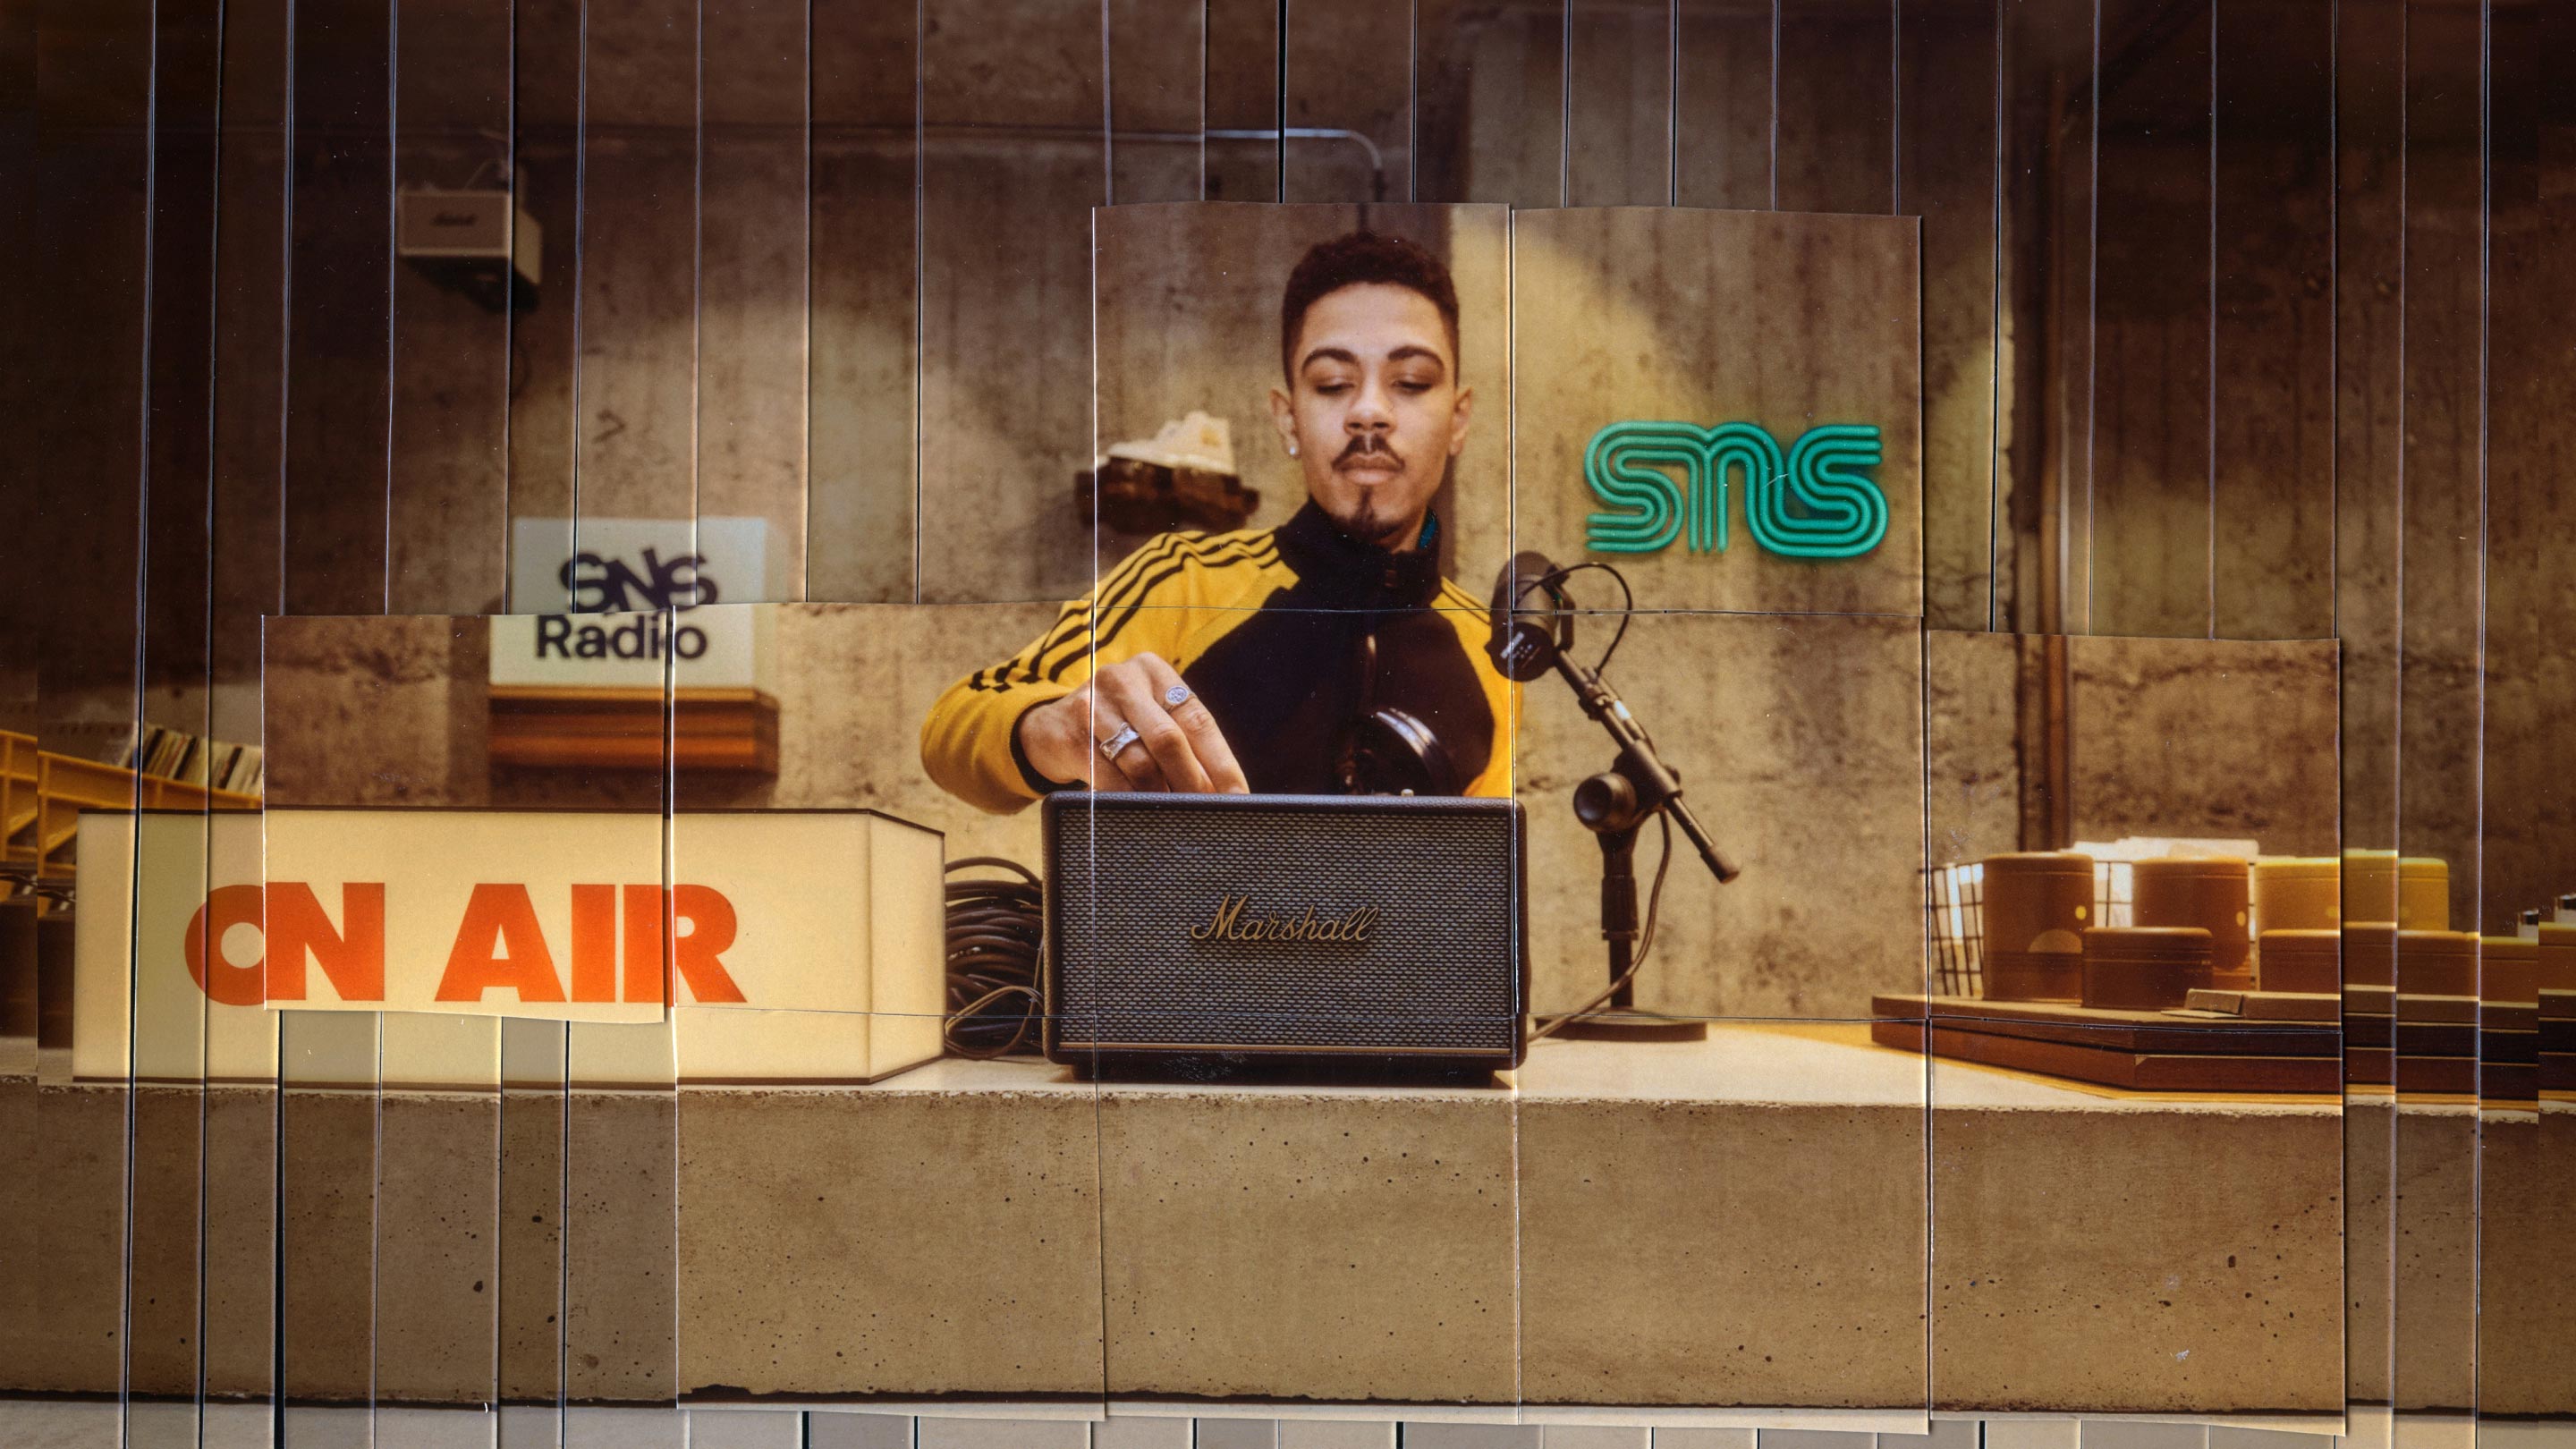 A young man adjusts controls on a marshall speaker at a radio station setup with neon signs and vintage decor.